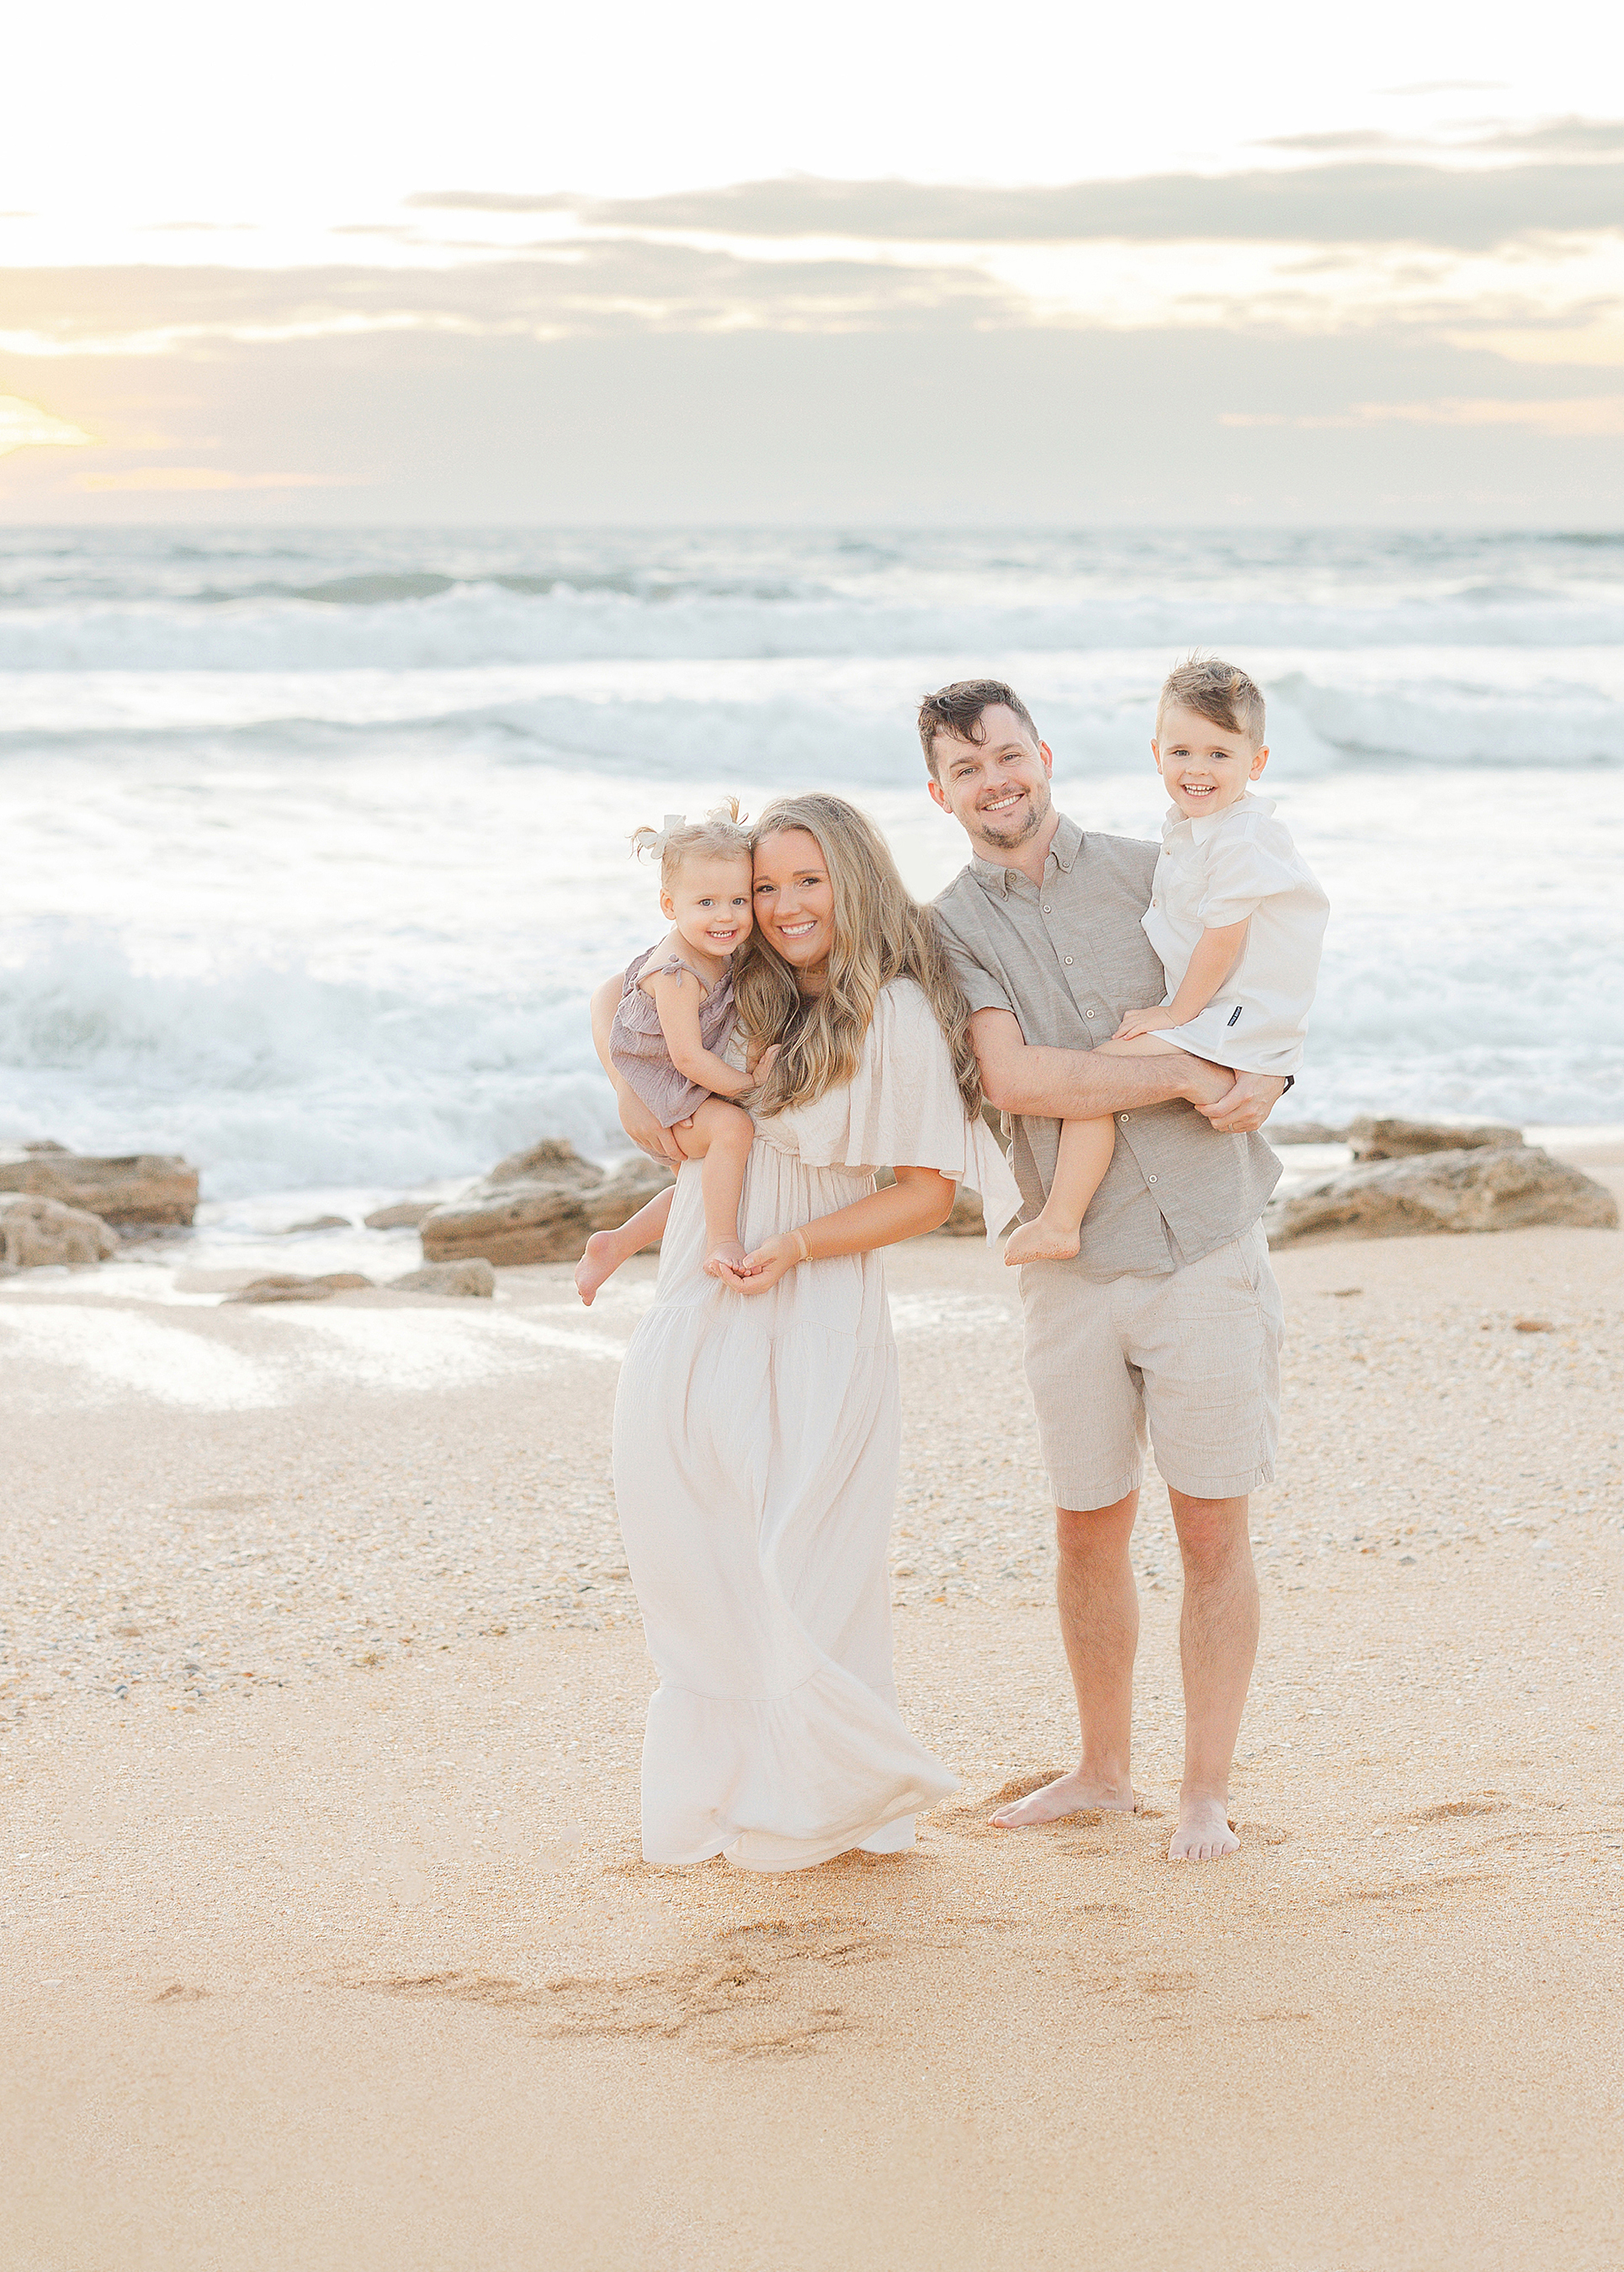 Colorful family beach portrait at sunrise in St. Augustine.